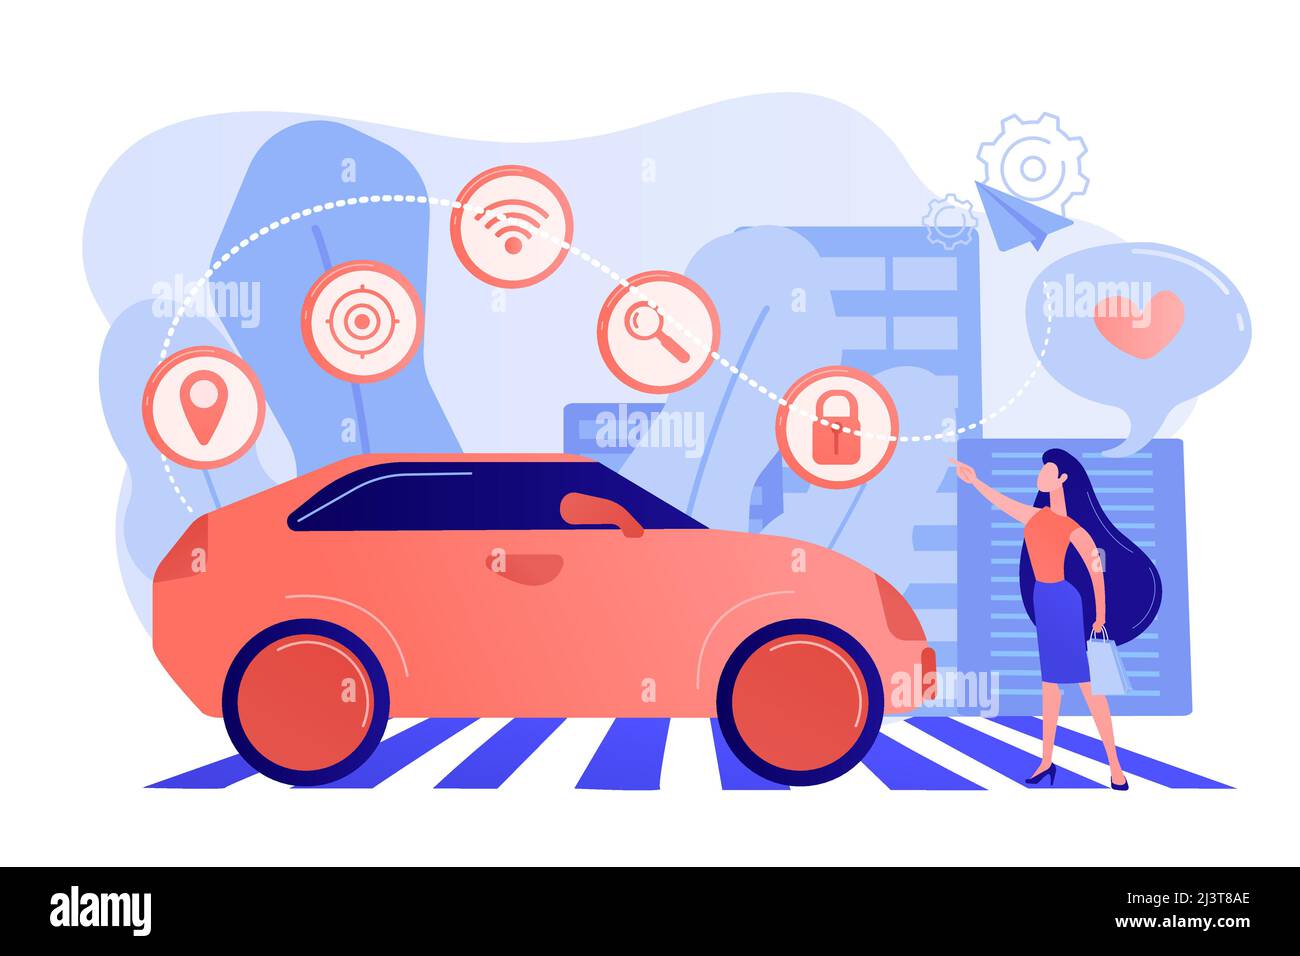 Businesswoman with heart likes using autonomos car with technology icons. Autonomous car, self-driving car, driverless robotic vehicle concept. Pinkis Stock Vector